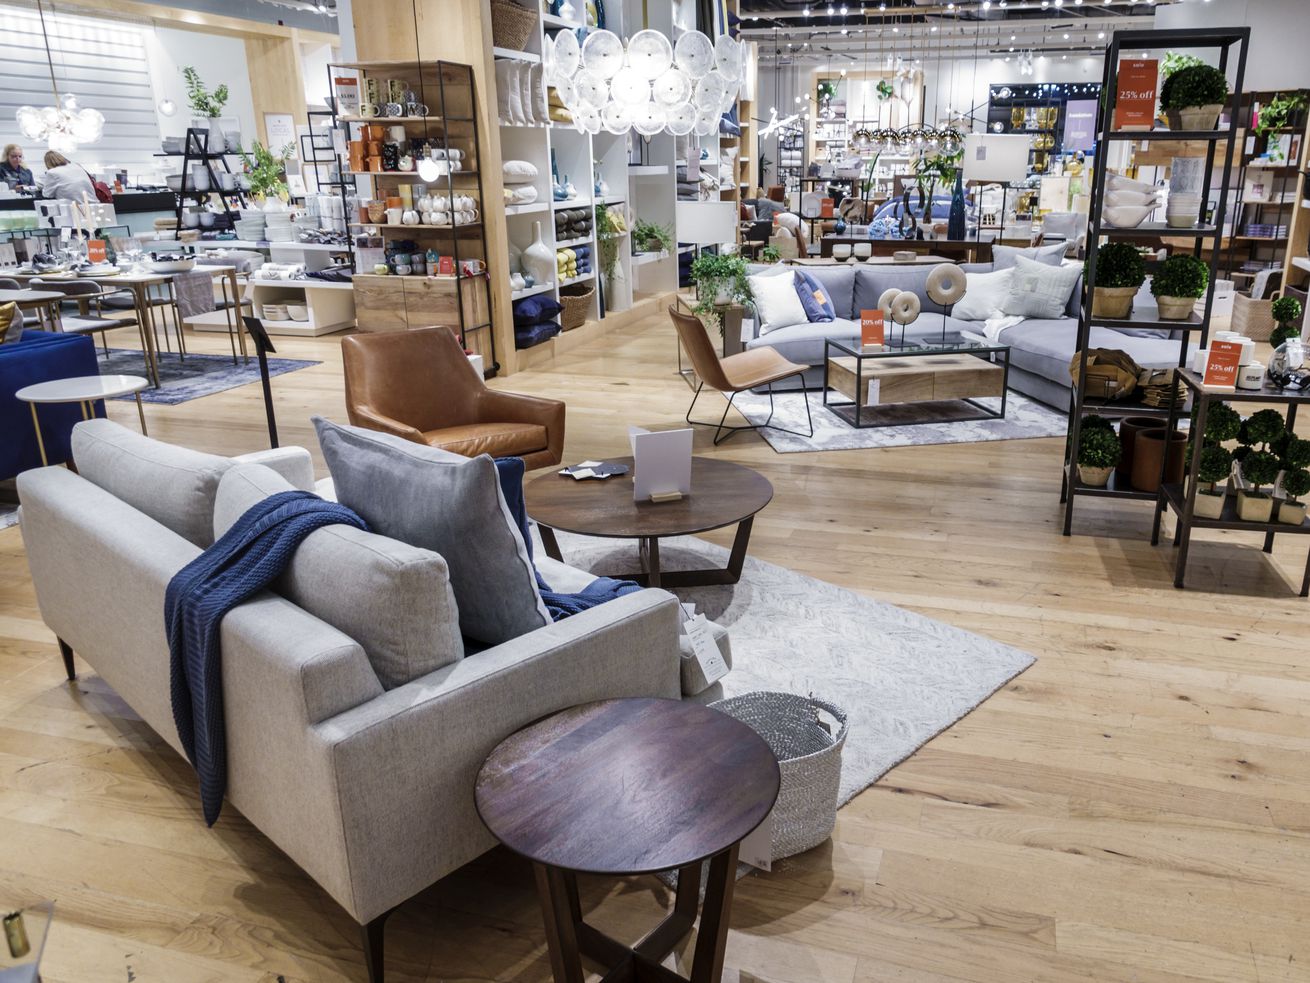 The delay-ridden agony of shopping at West Elm